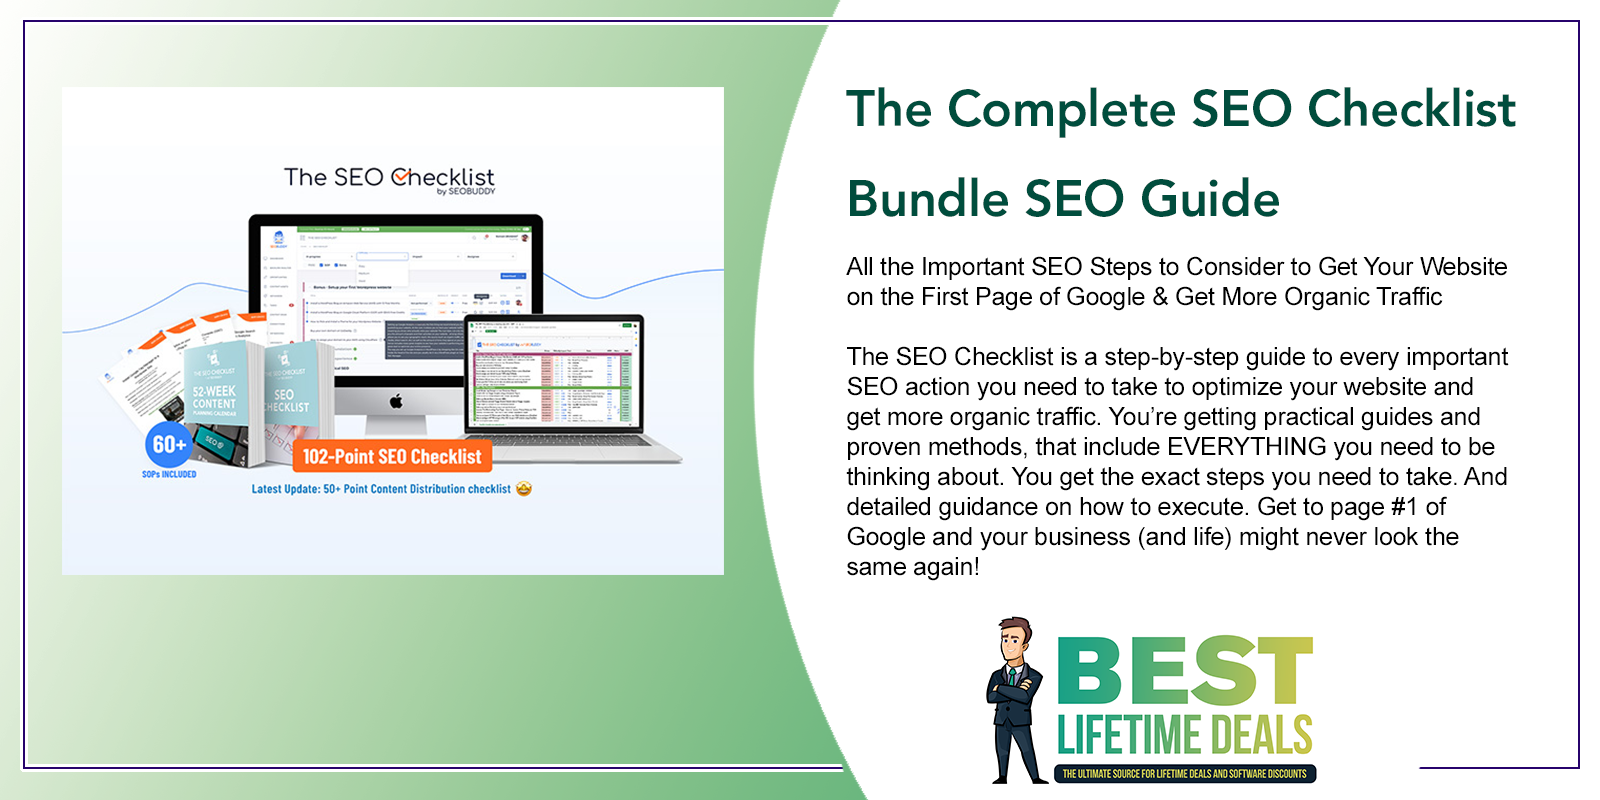 The Complete SEO Checklist Bundle SEO Guide Featured Image